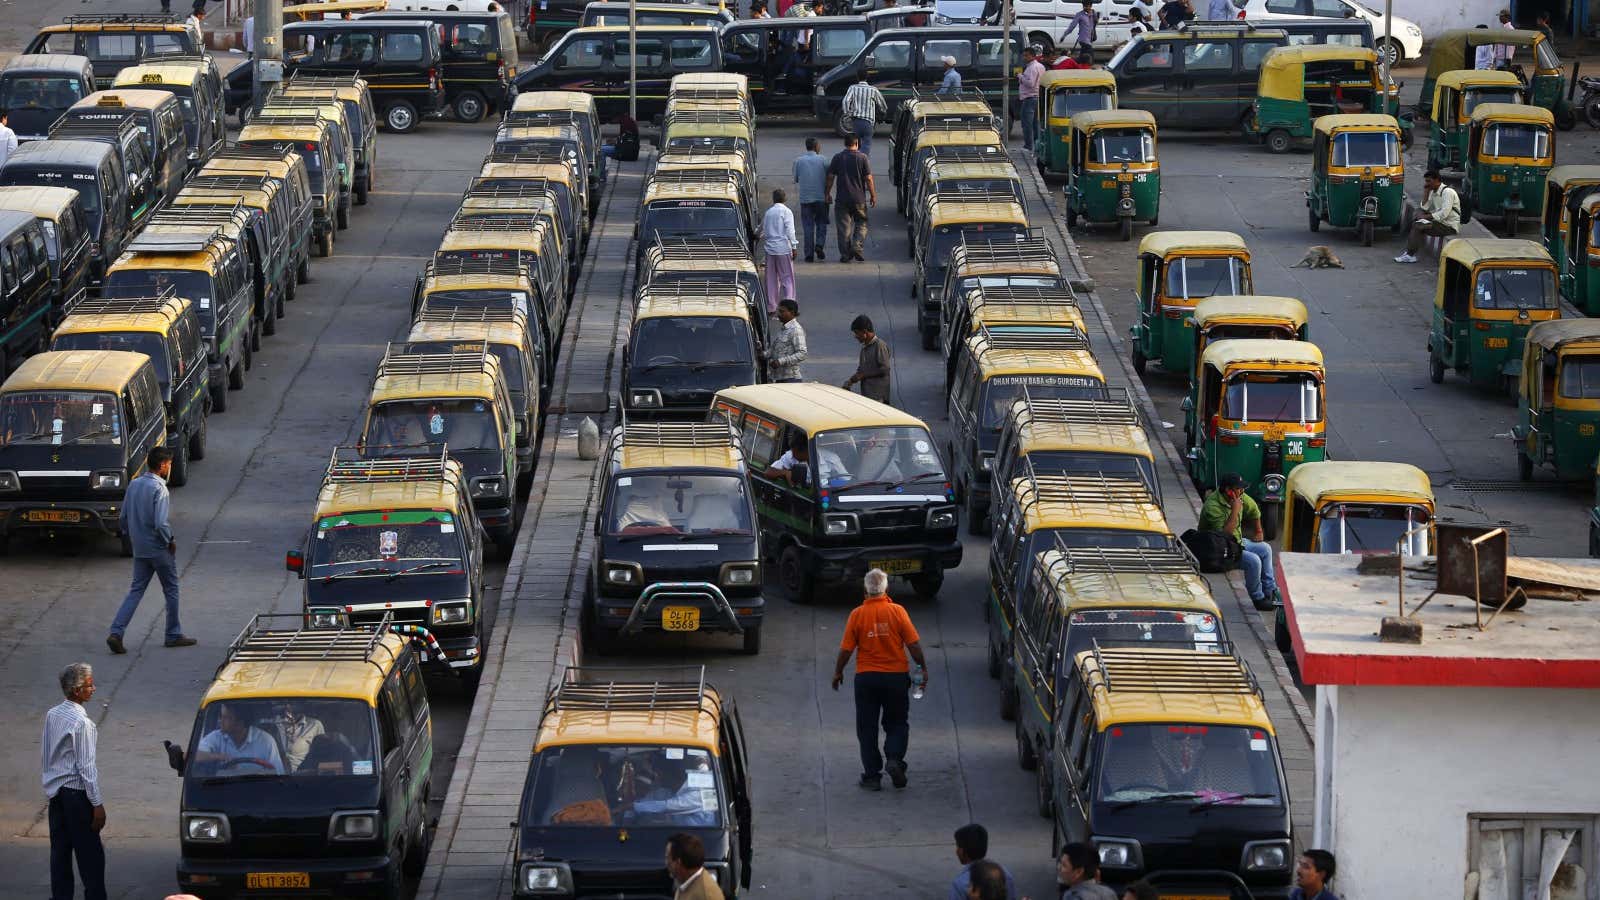 In India, there are an estimated five million taxi rides daily.